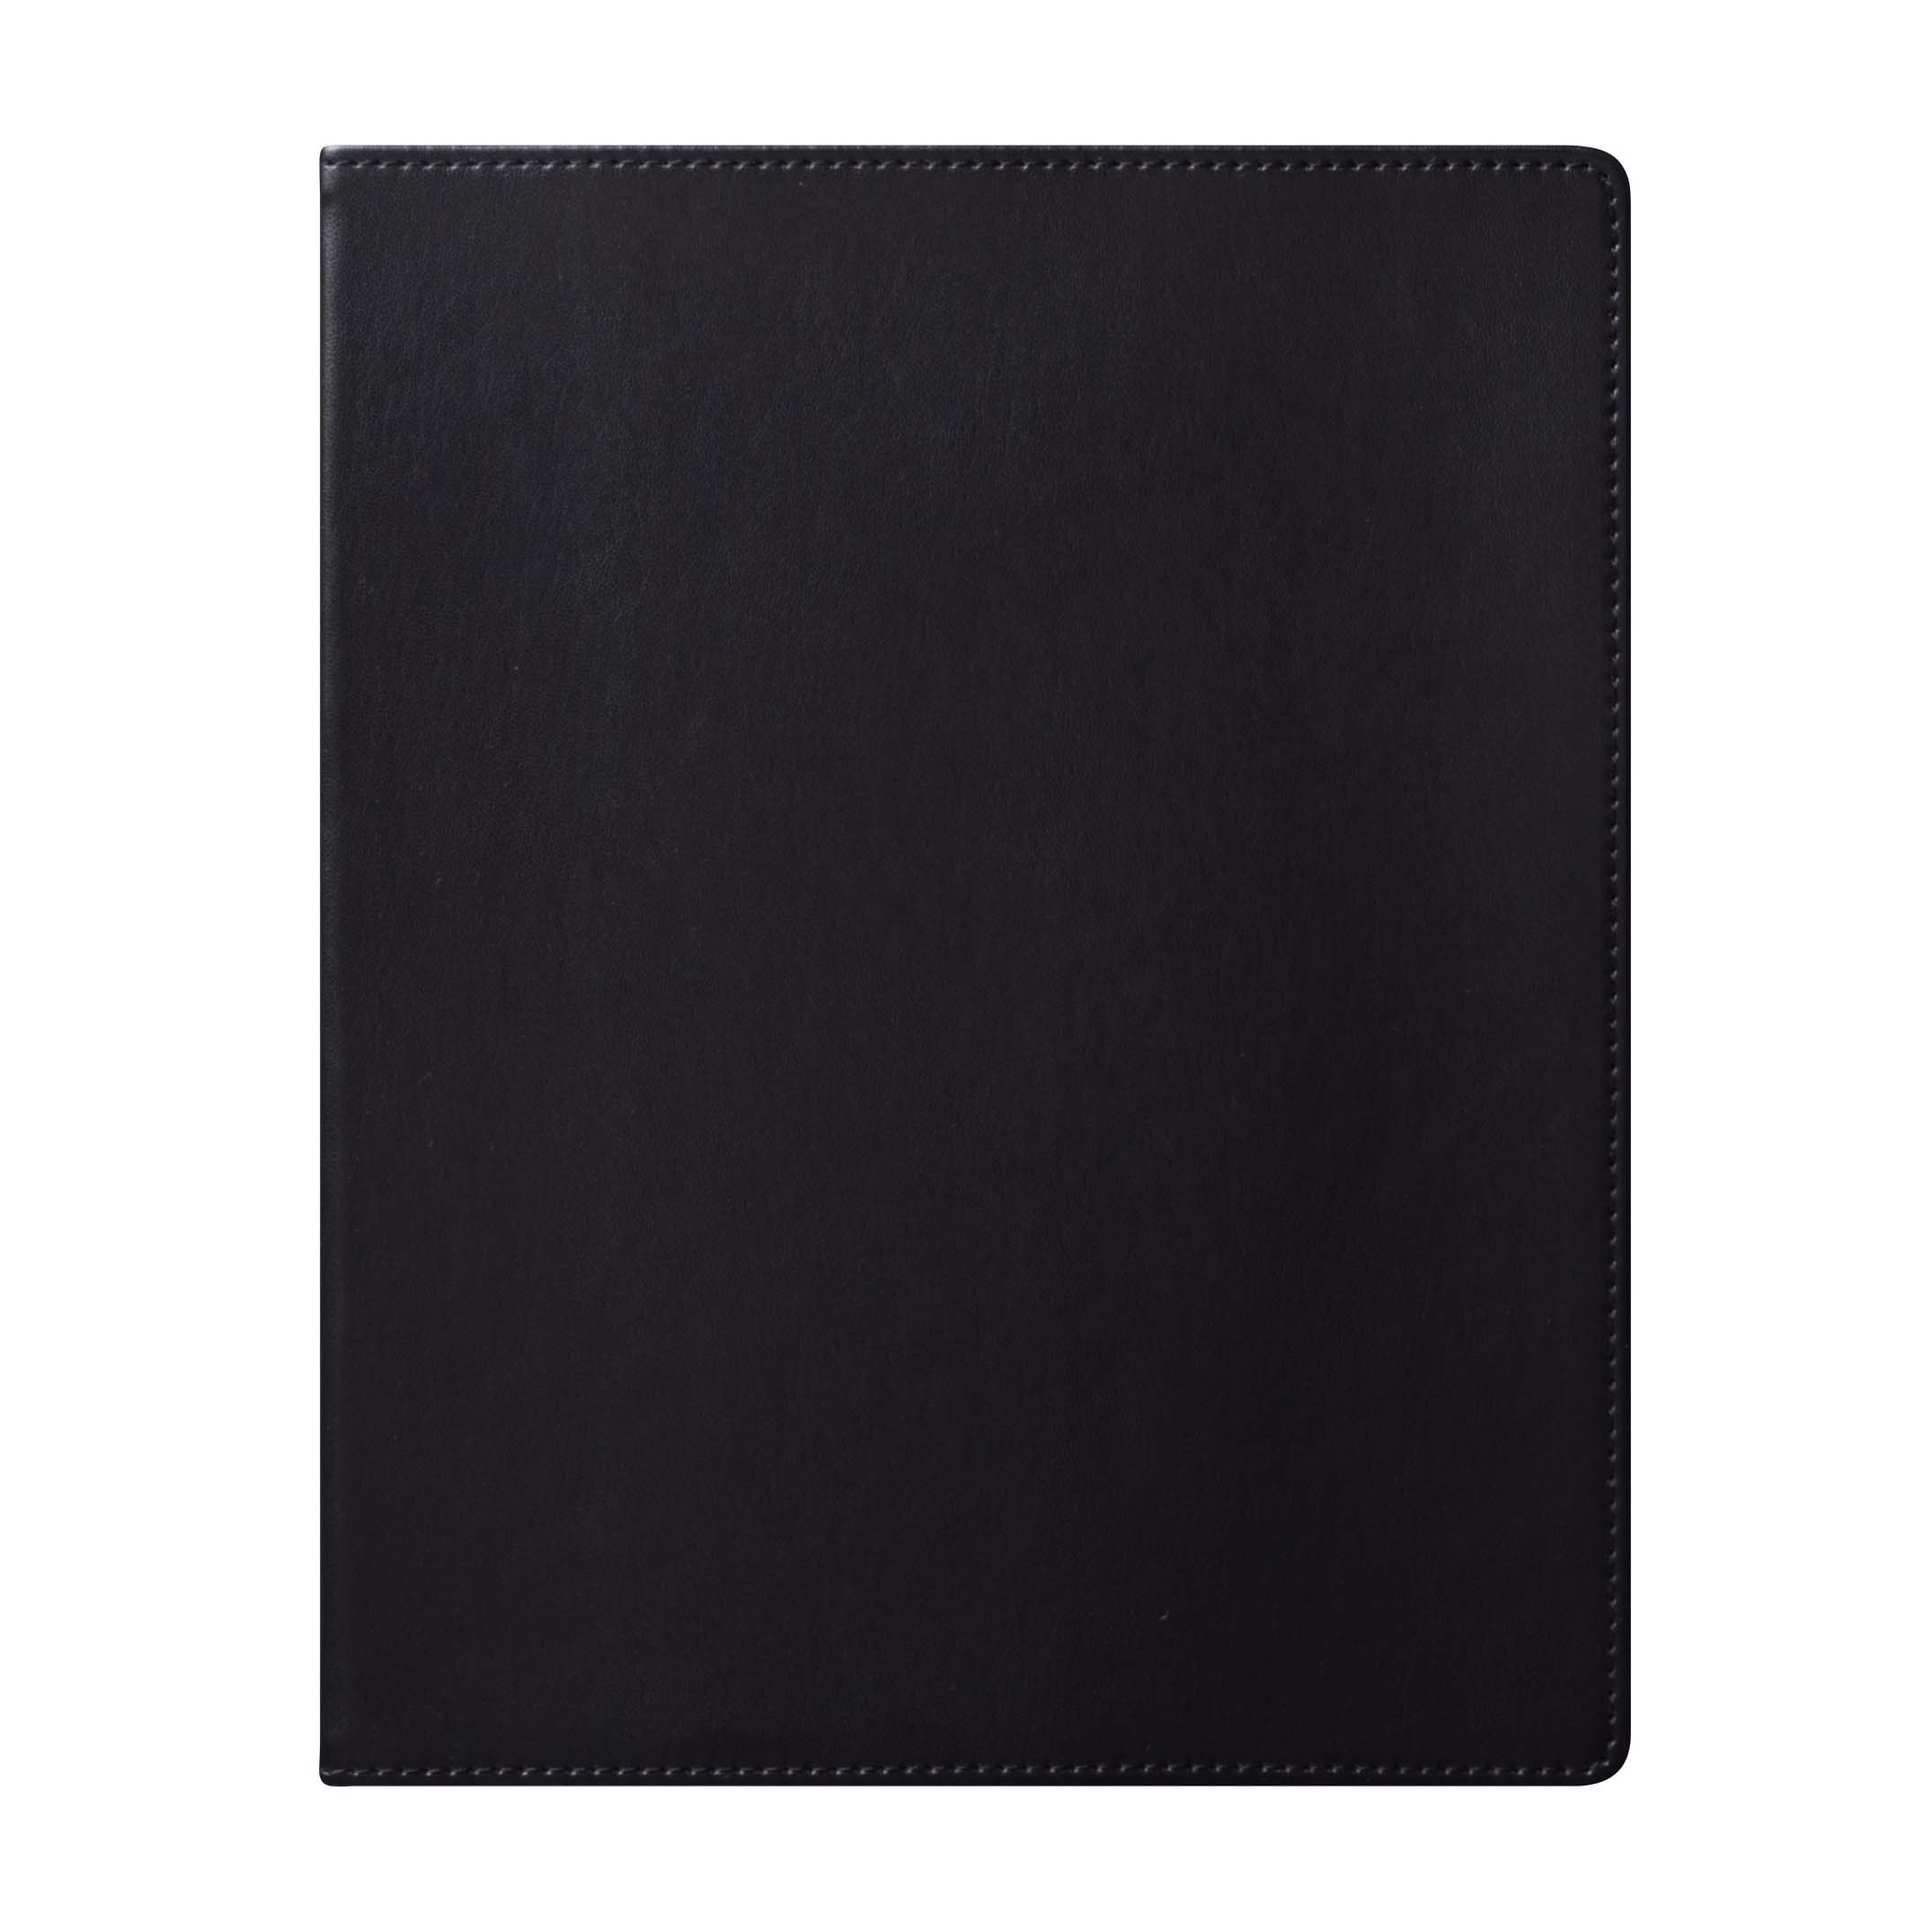 Eccolo Simple Black Journal Large - Shop Notebooks at H-E-B